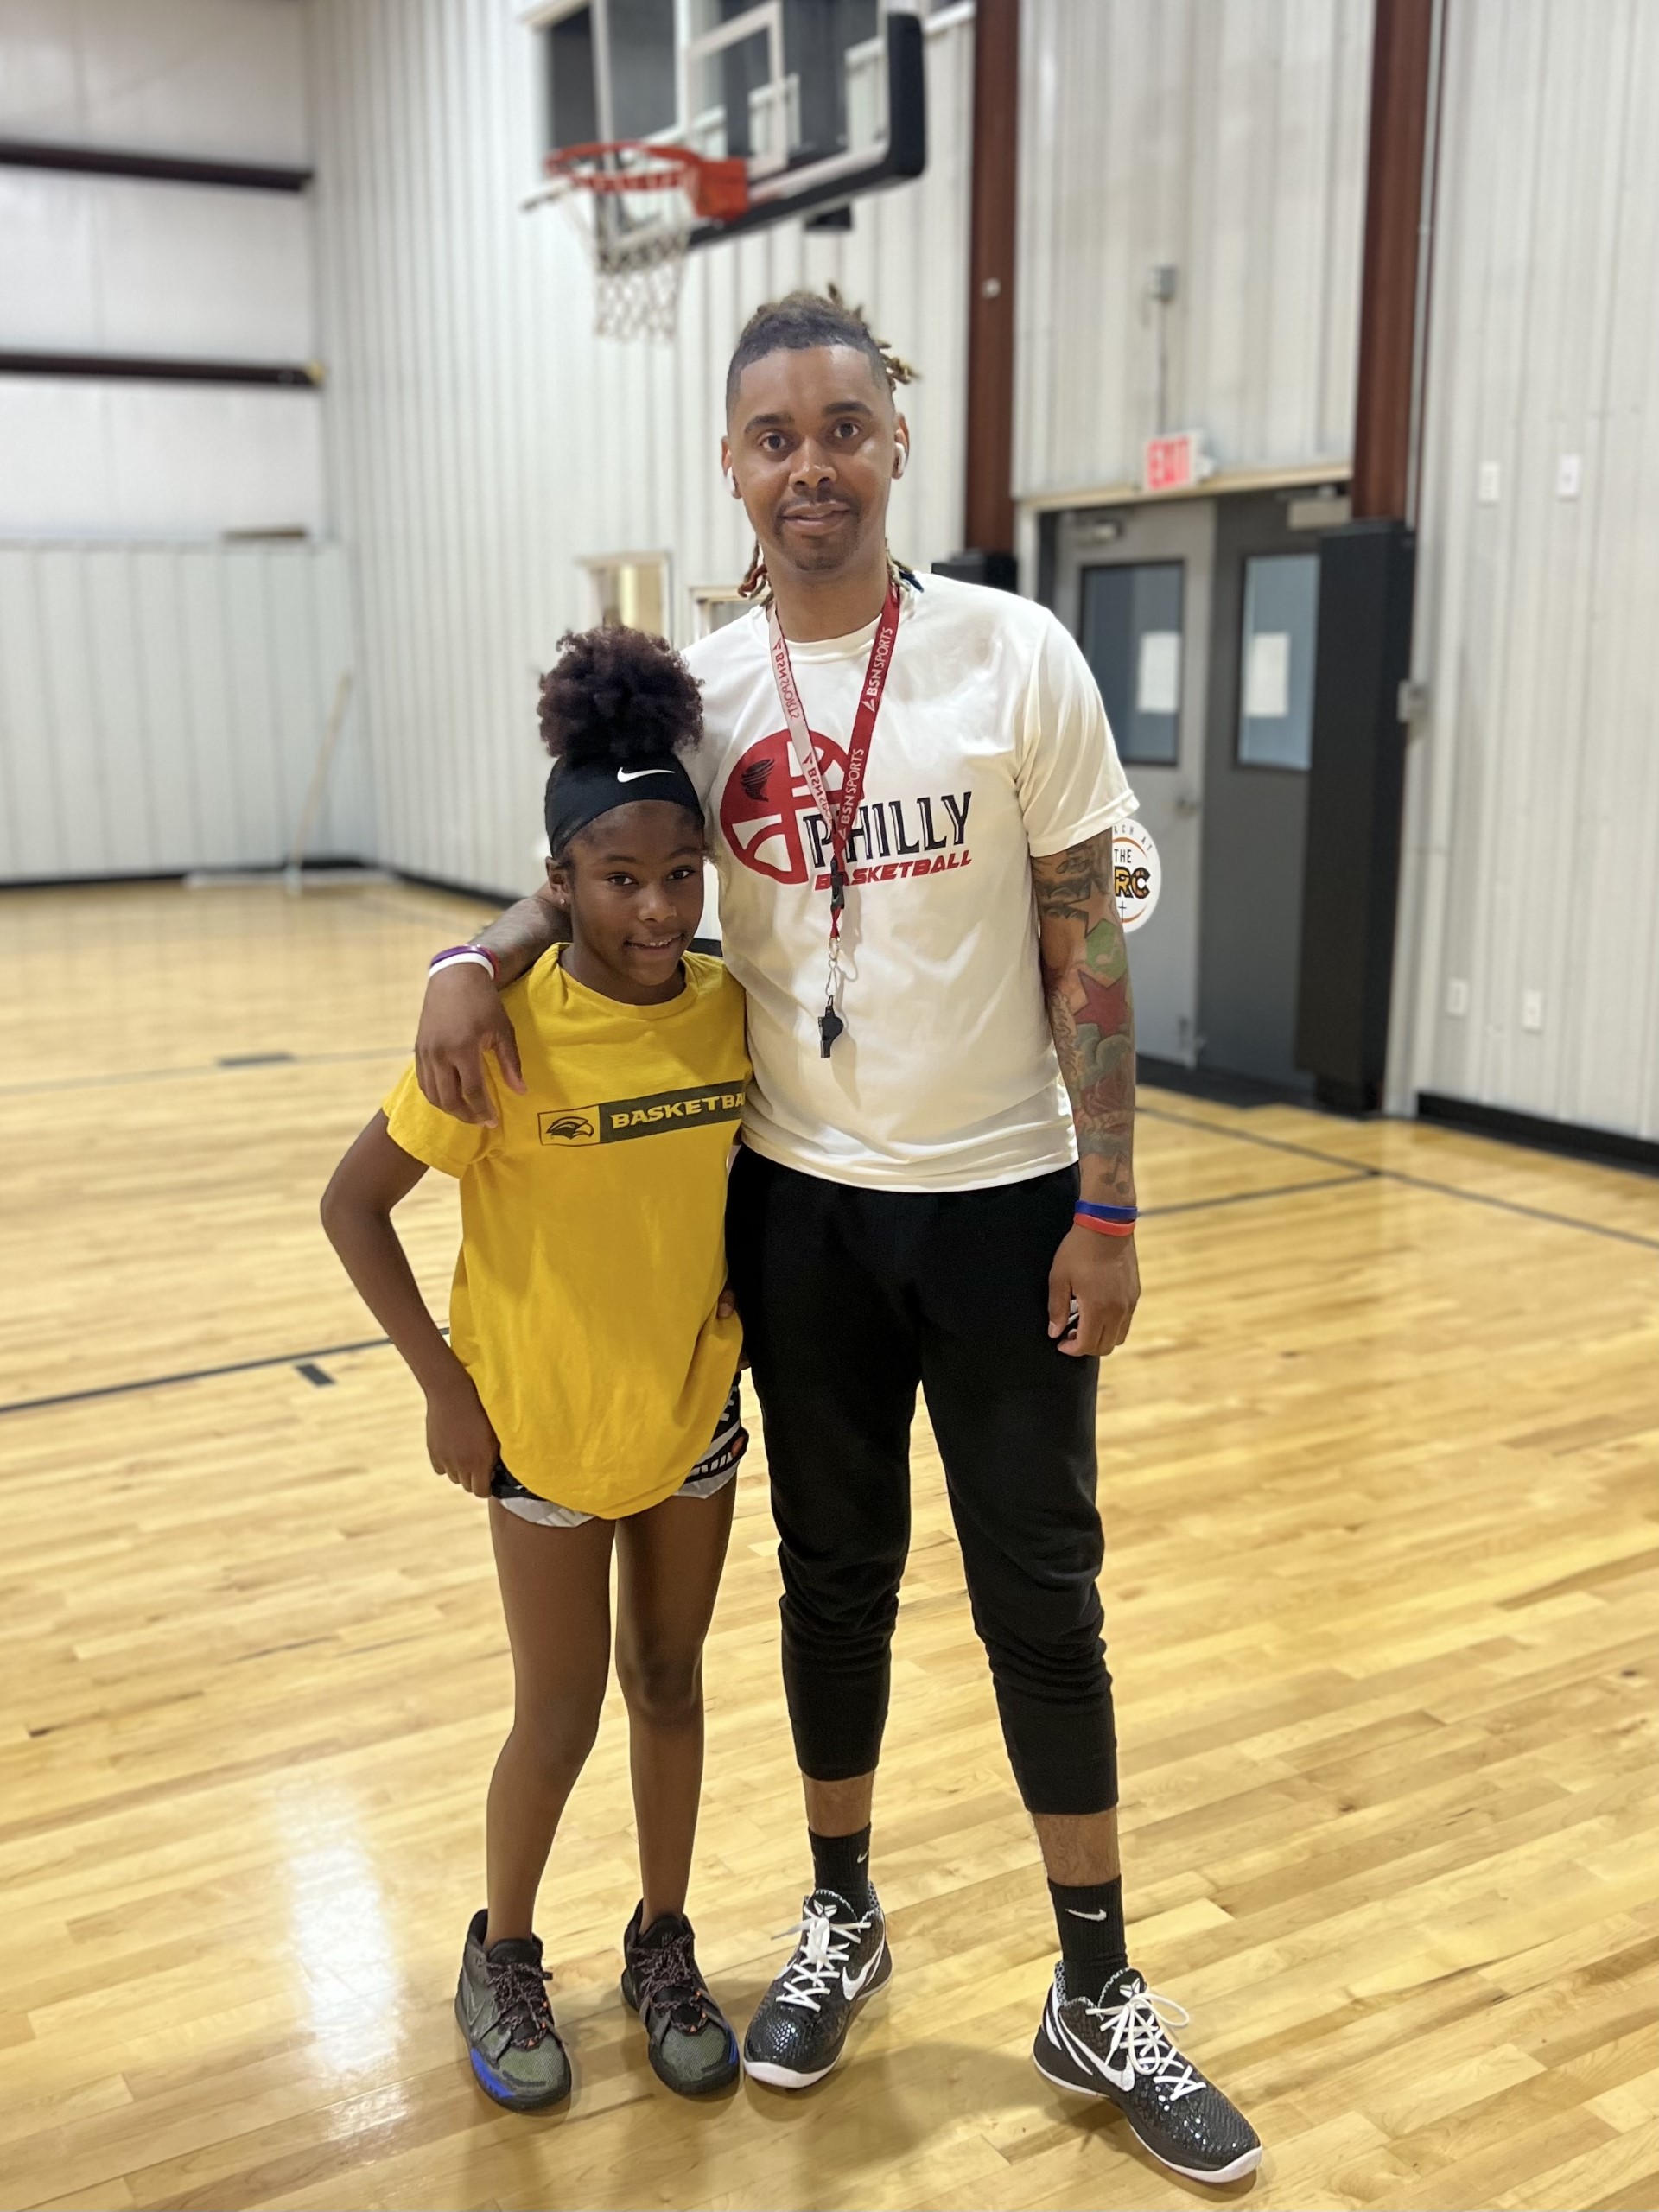 Image of Jacob Boler with a child he coaches during a Saturday basketball training clinic.